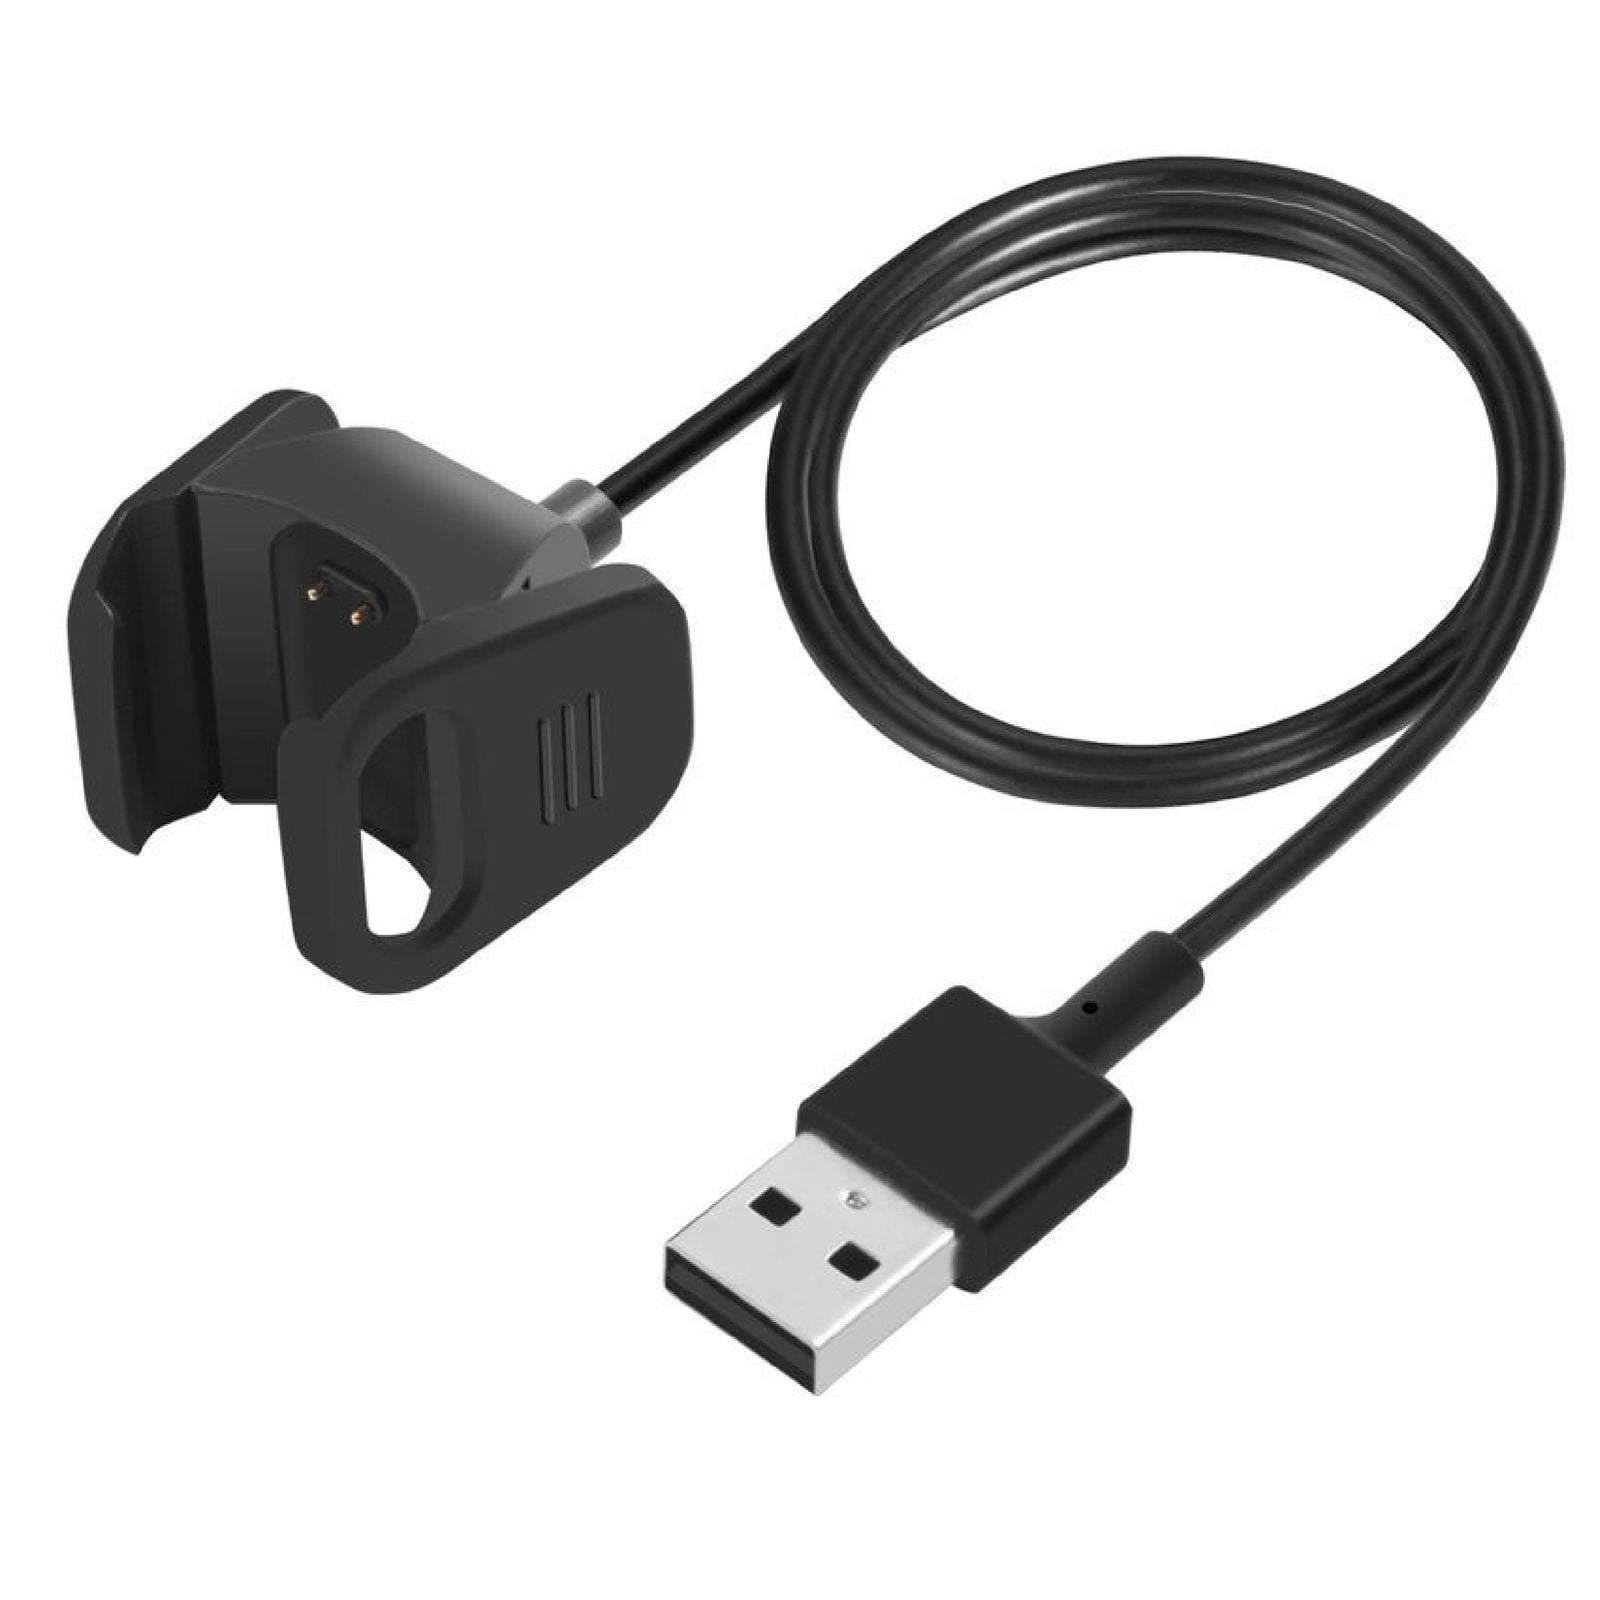 Genuine Fitbit Flex 2 Charging Cable Plugs into any USB Port to Quickly Charge 